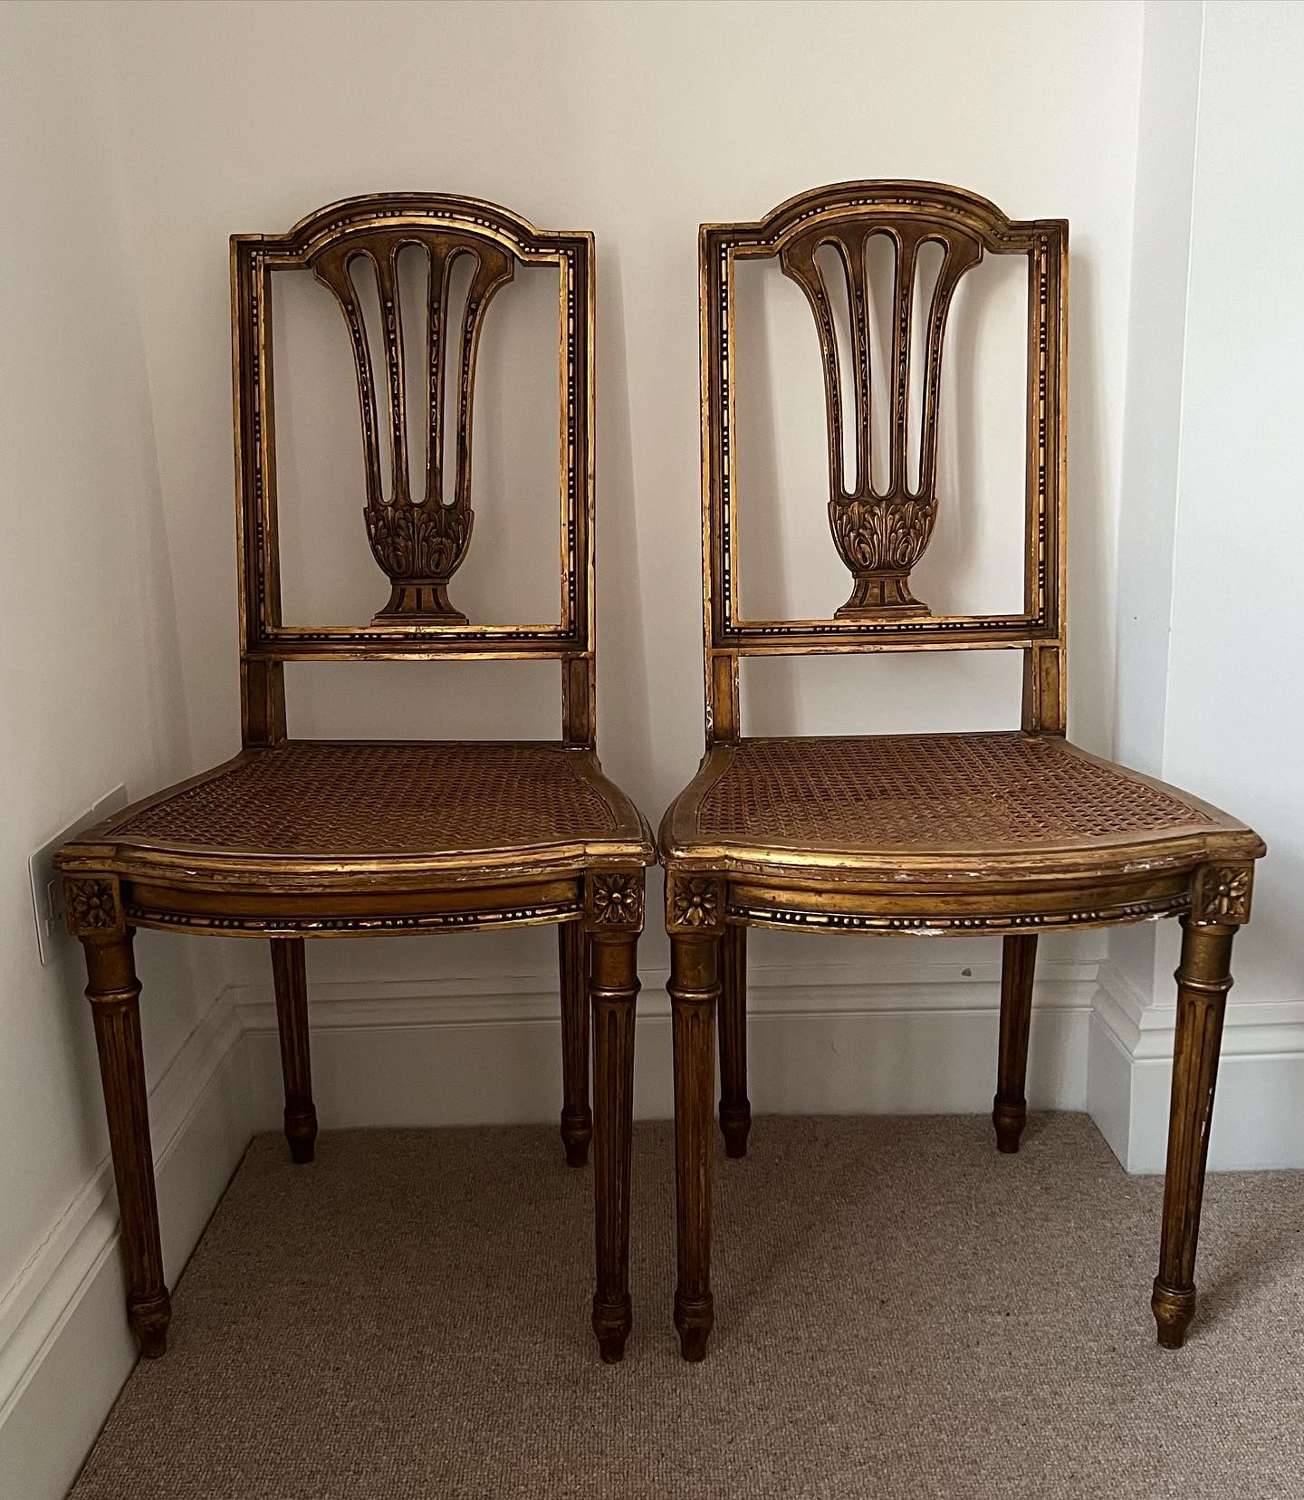 Early 20thC Matched Pair of Giltwood Caned Seat Chairs